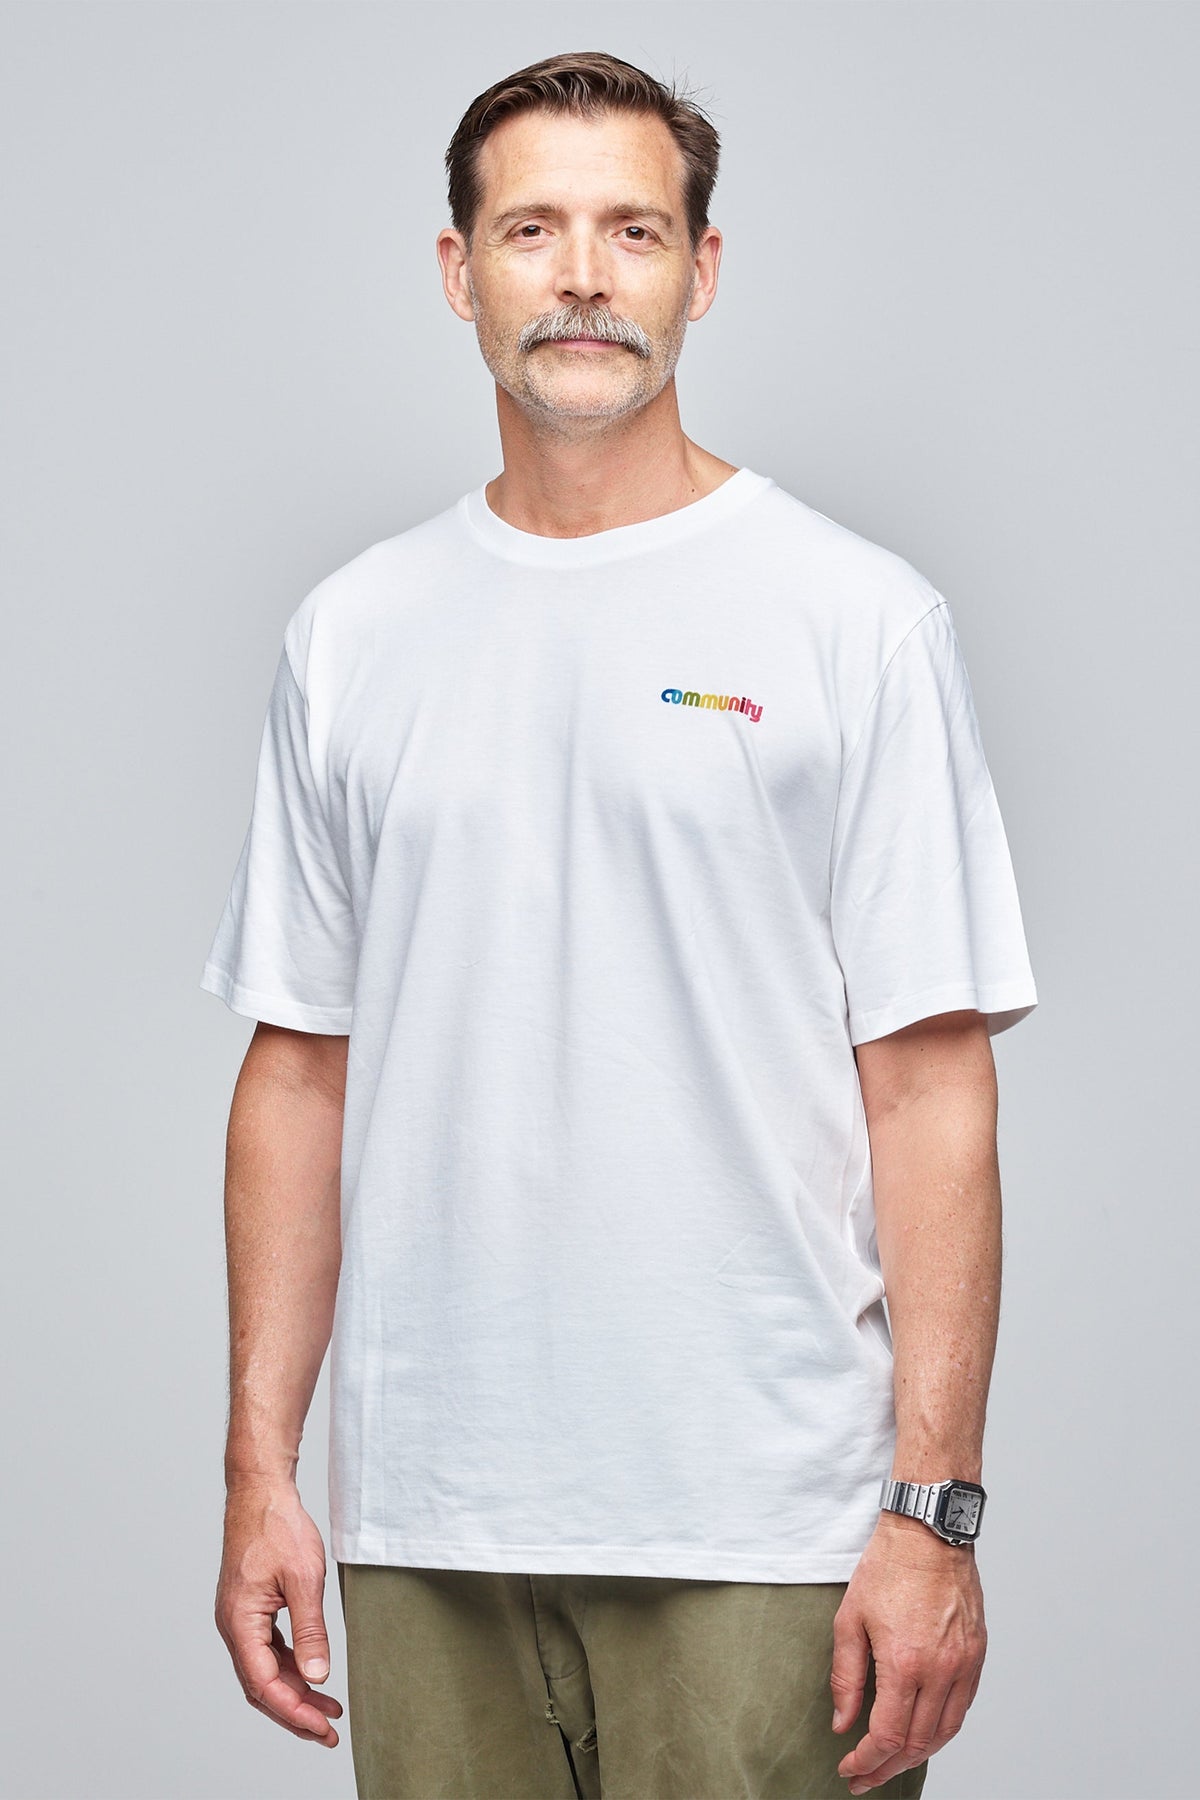 
            Community Clothing founder, Patrick Grant, smiling and wearing a white short sleeve t-shirt with branding on the chest.